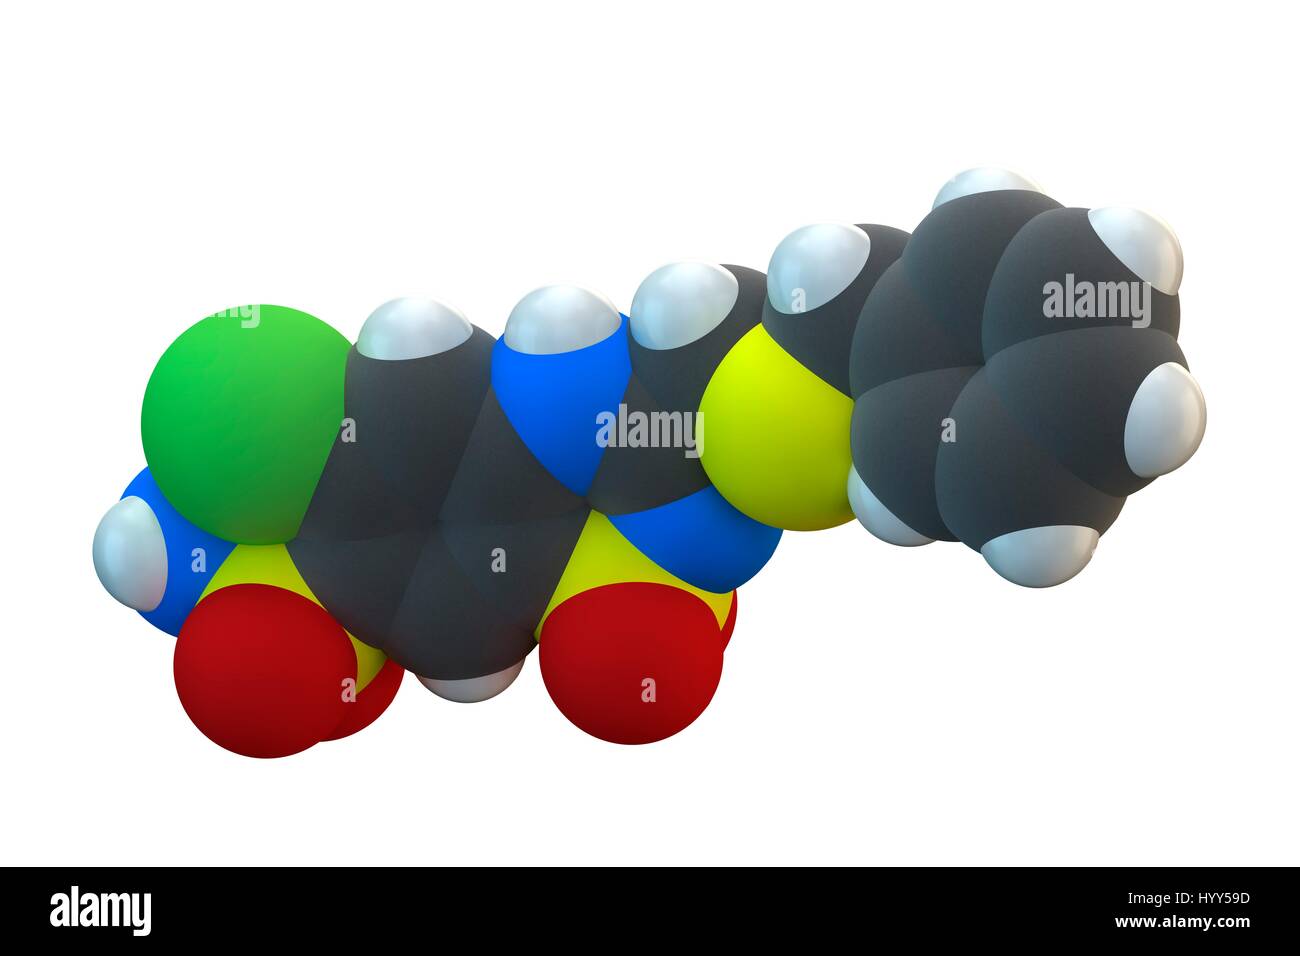 Benzthiazide drug molecule. It is used for hypertension (high blood pressure) and edema treatment. Chemical formula is C15H14ClN3O4S3. Atoms are represented as spheres: carbon (grey), hydrogen (white), nitrogen (blue), oxygen (red), sulphur (yellow). Illustration. Stock Photo